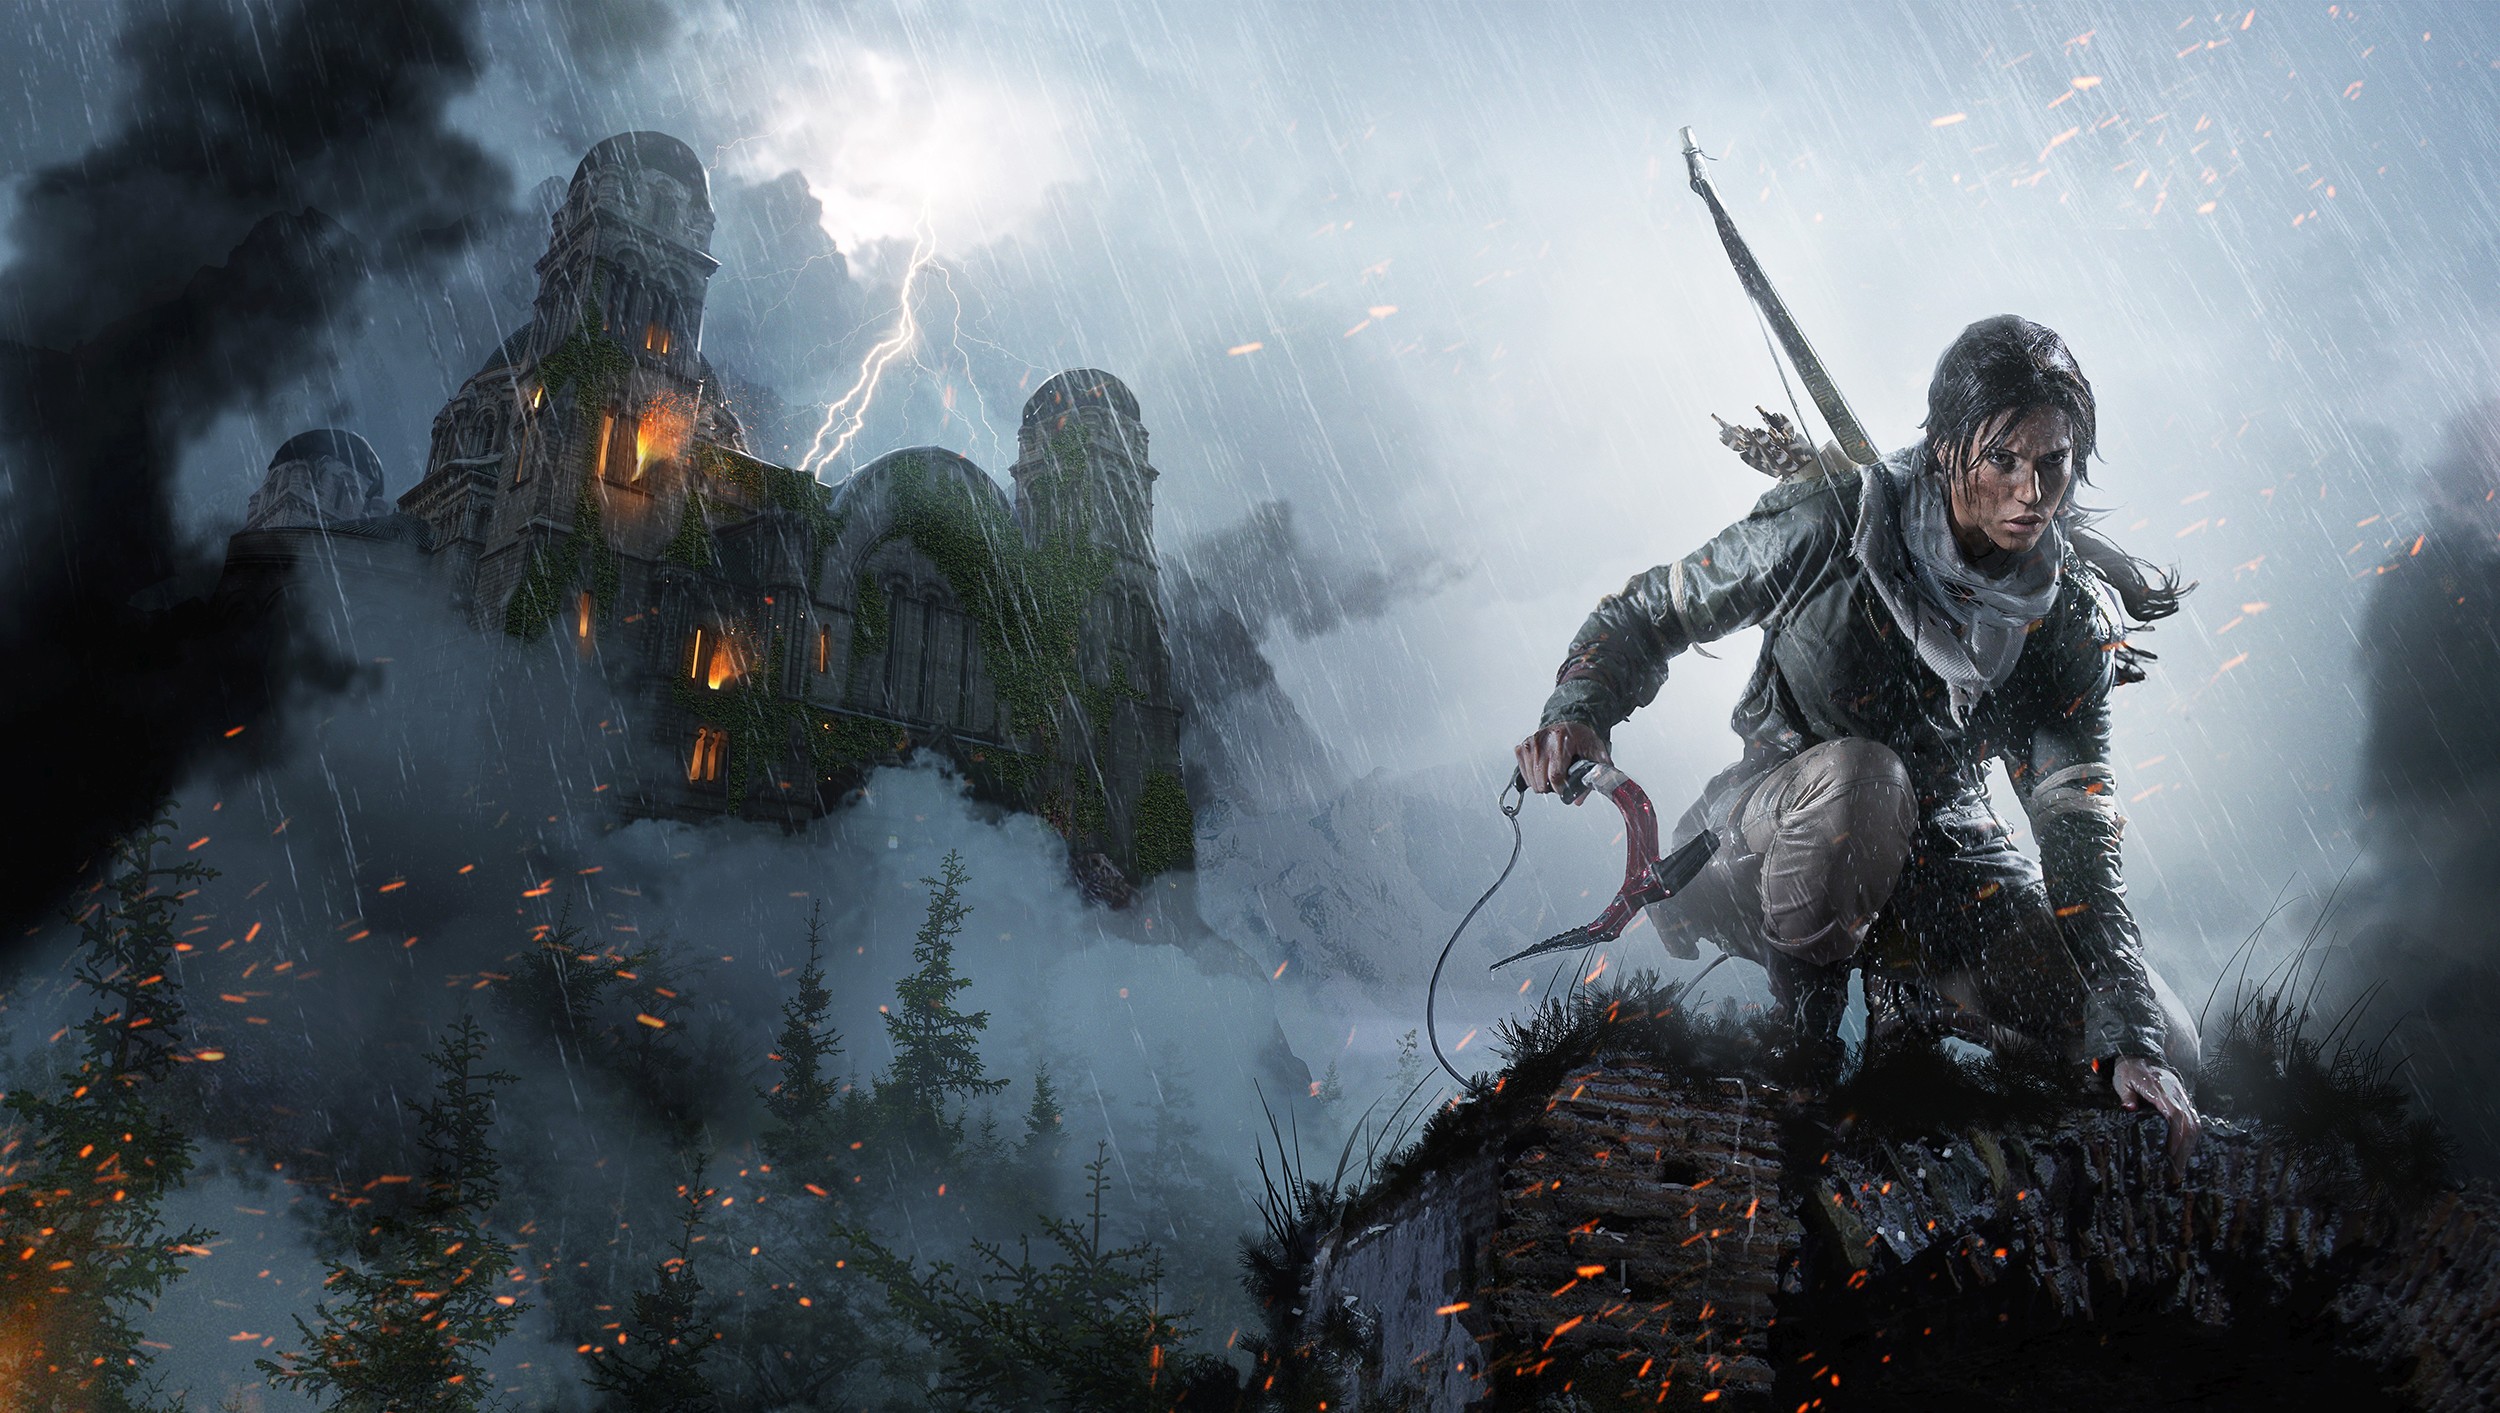 Rise Of The Tomb Raider Backgrounds, Compatible - PC, Mobile, Gadgets| 2500x1413 px